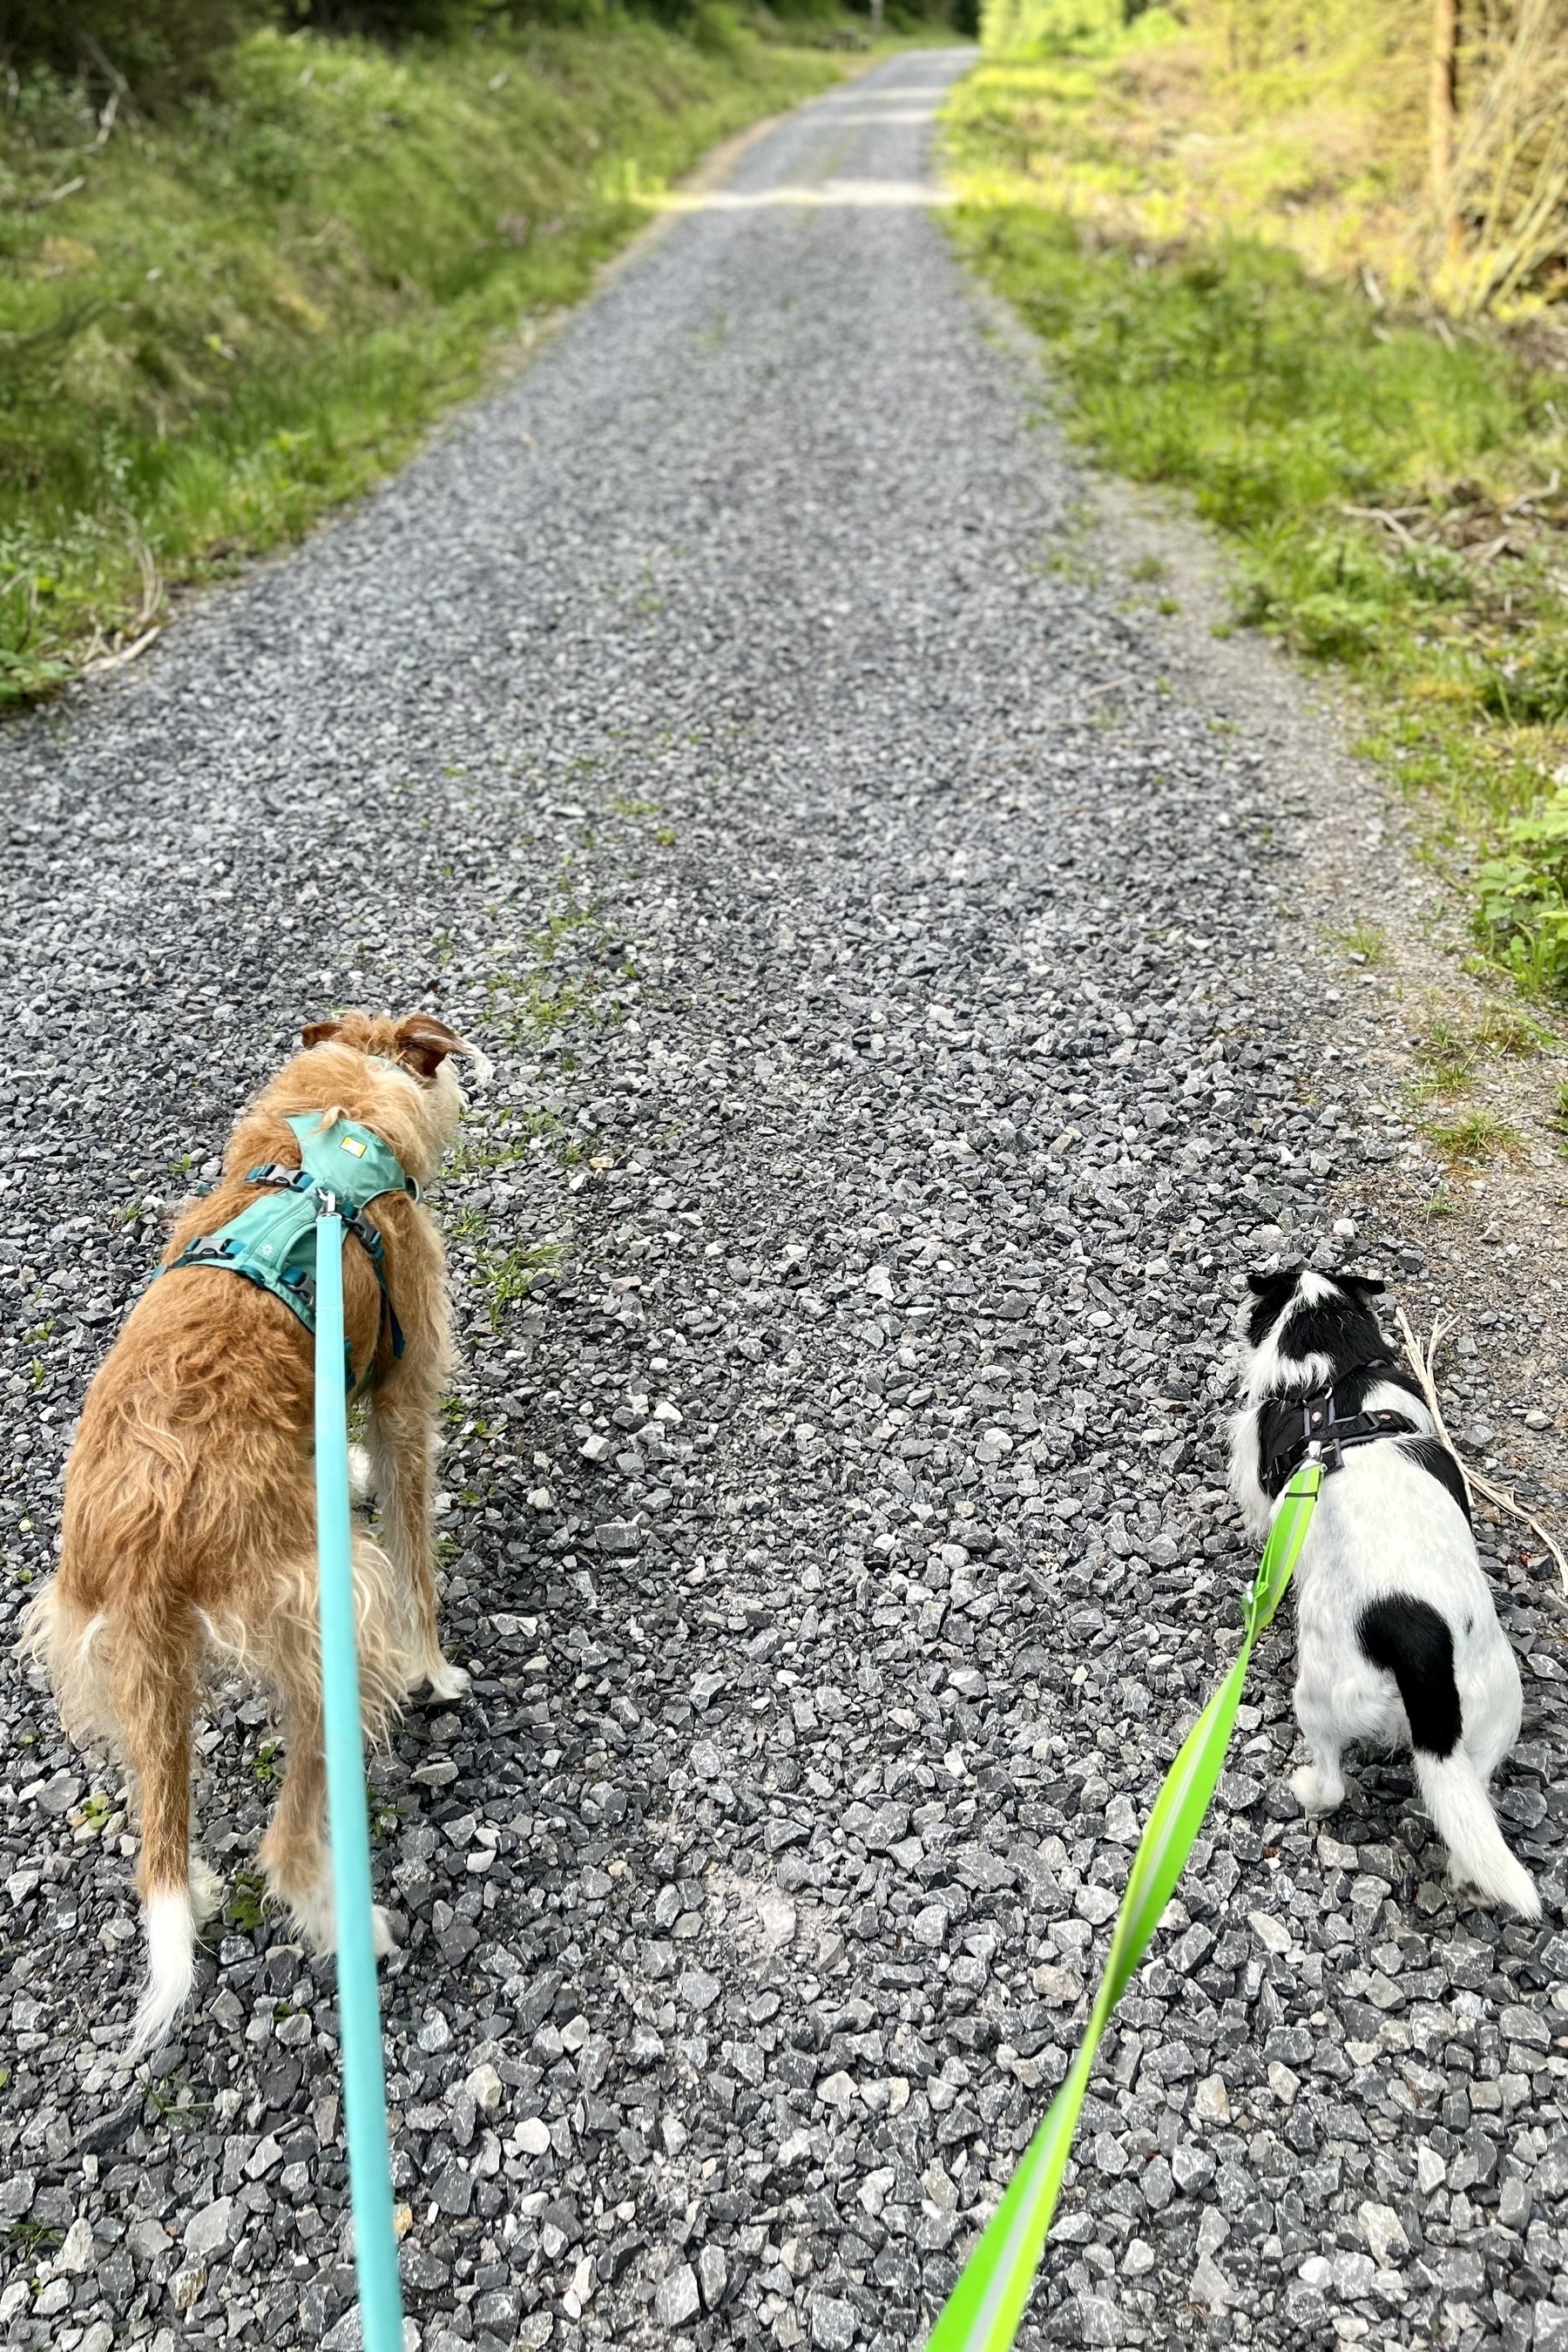 Shane the lurcher on the left, Leela the terrier on the right, pull at their green leashes to move faster up the hilly gravel trail.